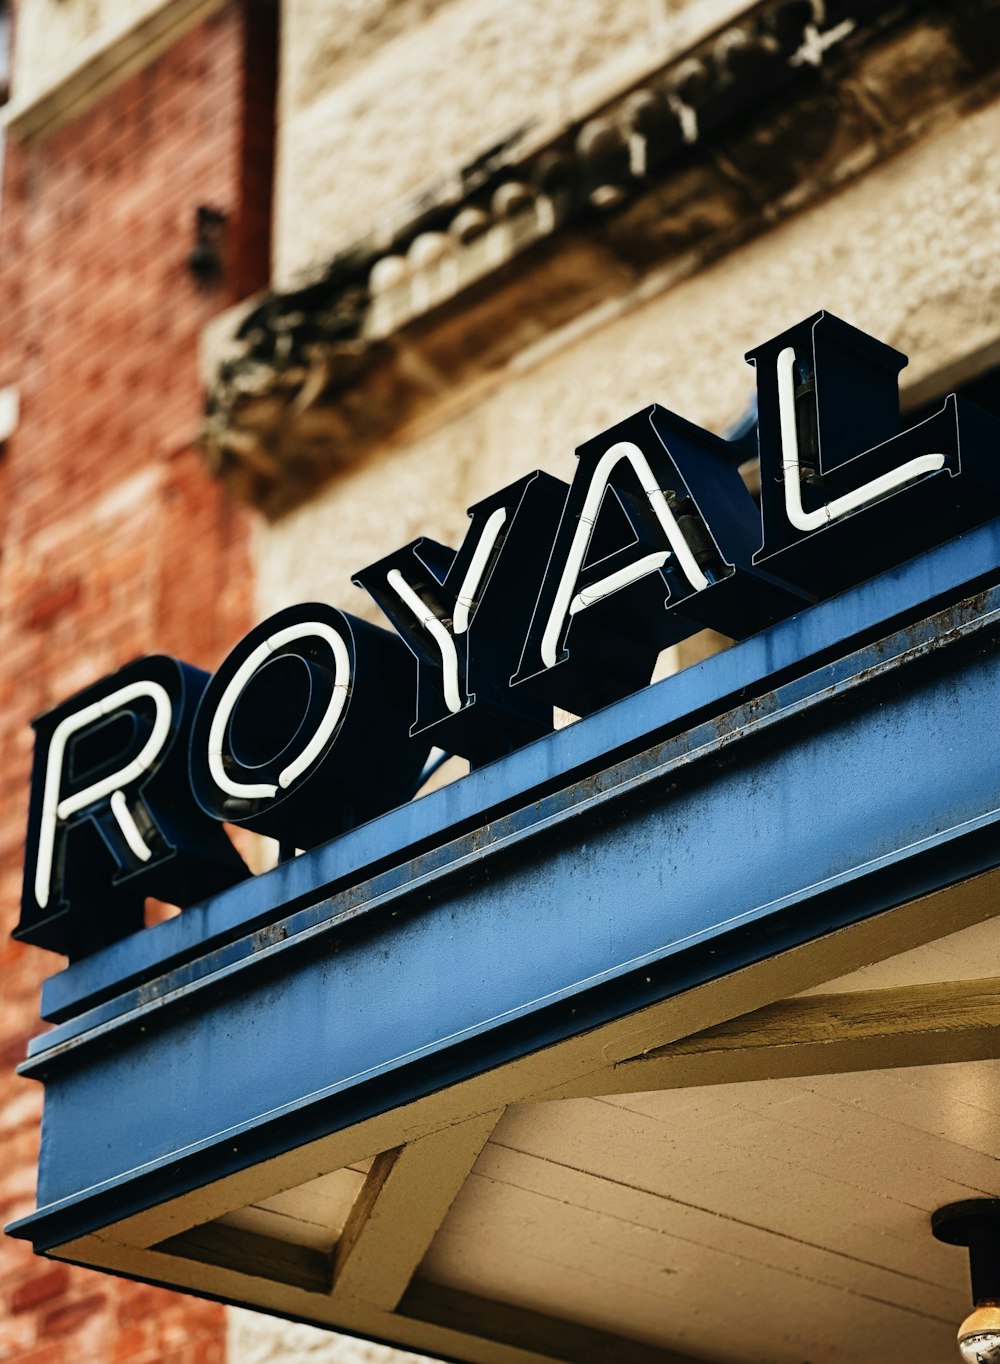 a royal sign on the side of a building